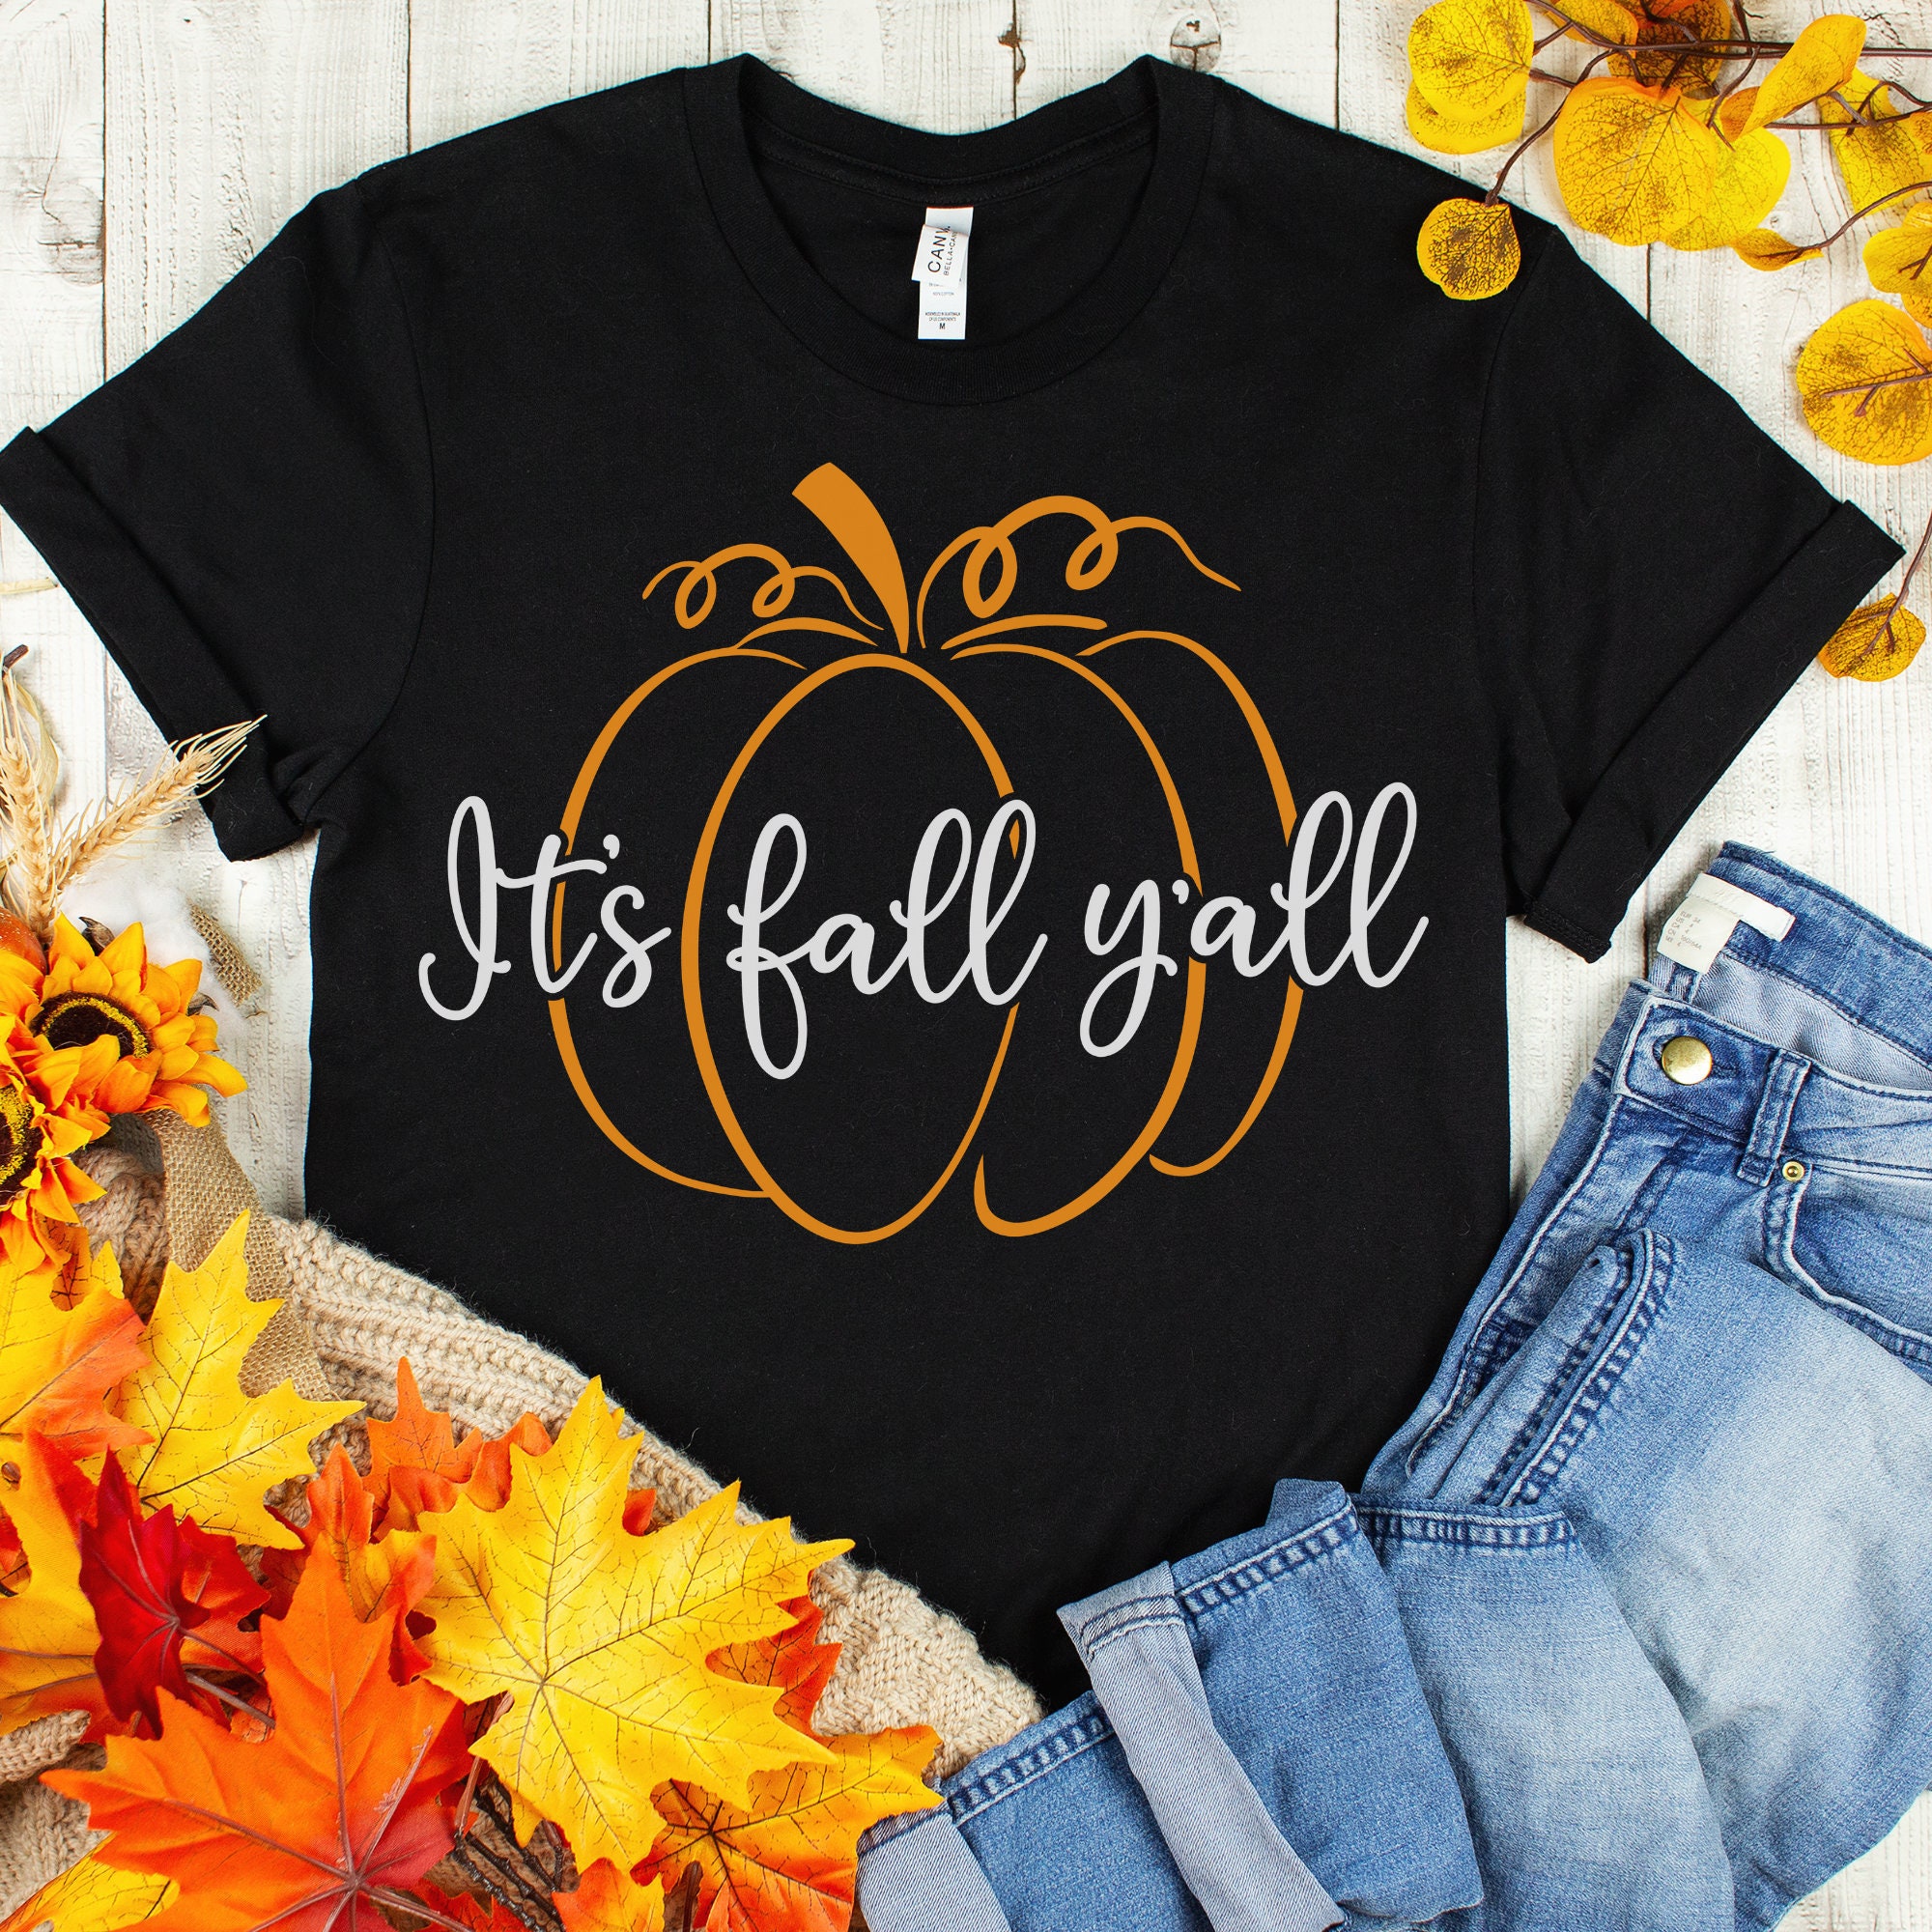 Marque-page livre-It's fall y'all